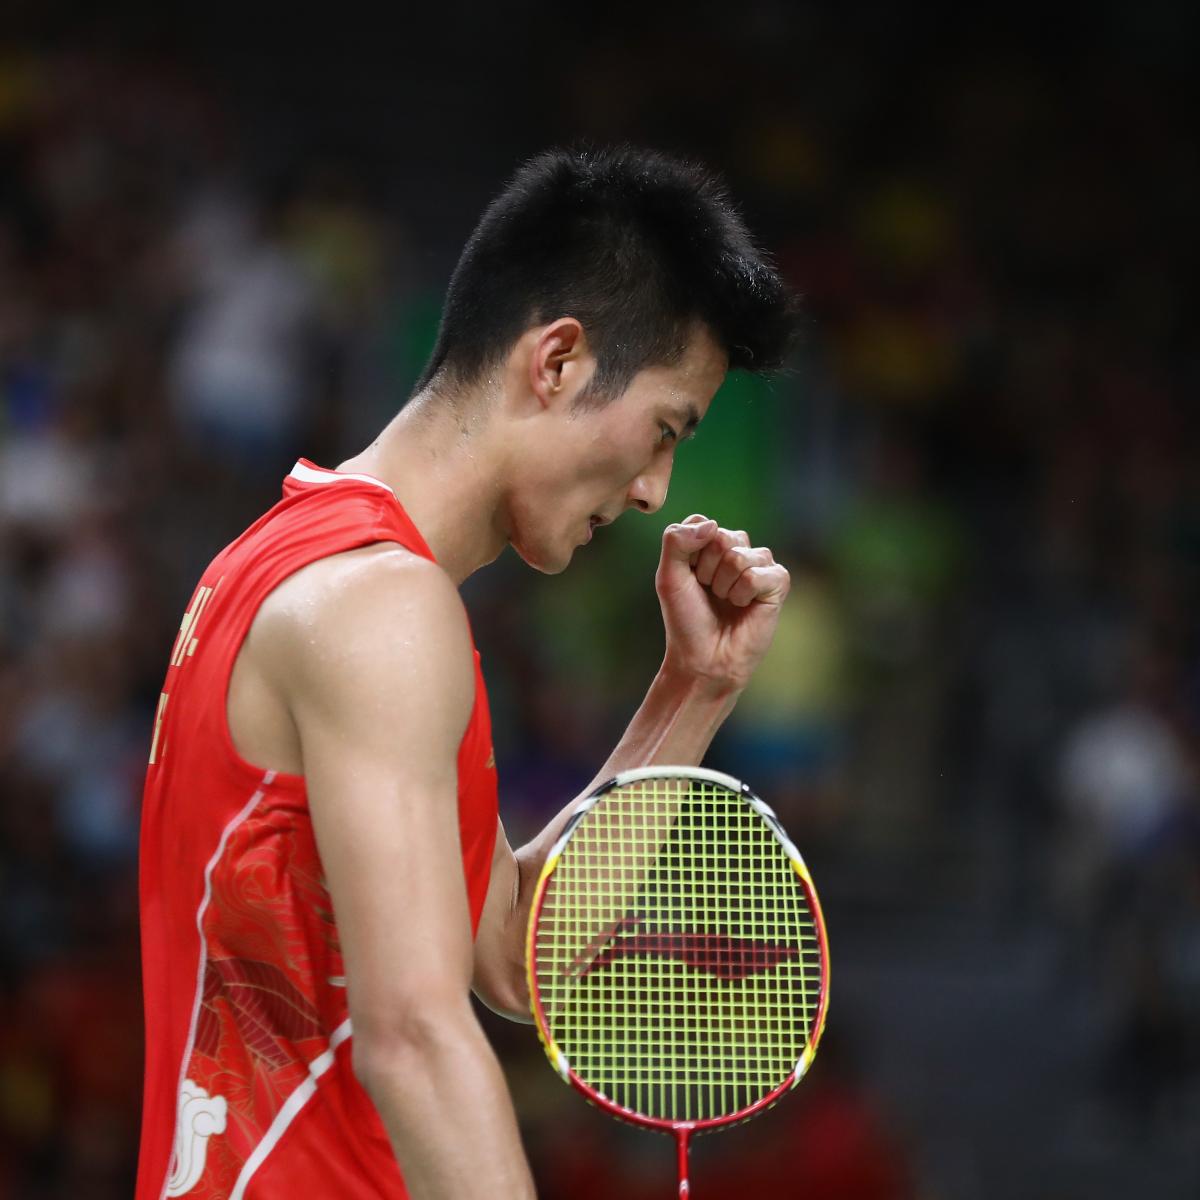 Olympic Badminton 2016: Men's Singles Medal Winners, Scores and Results